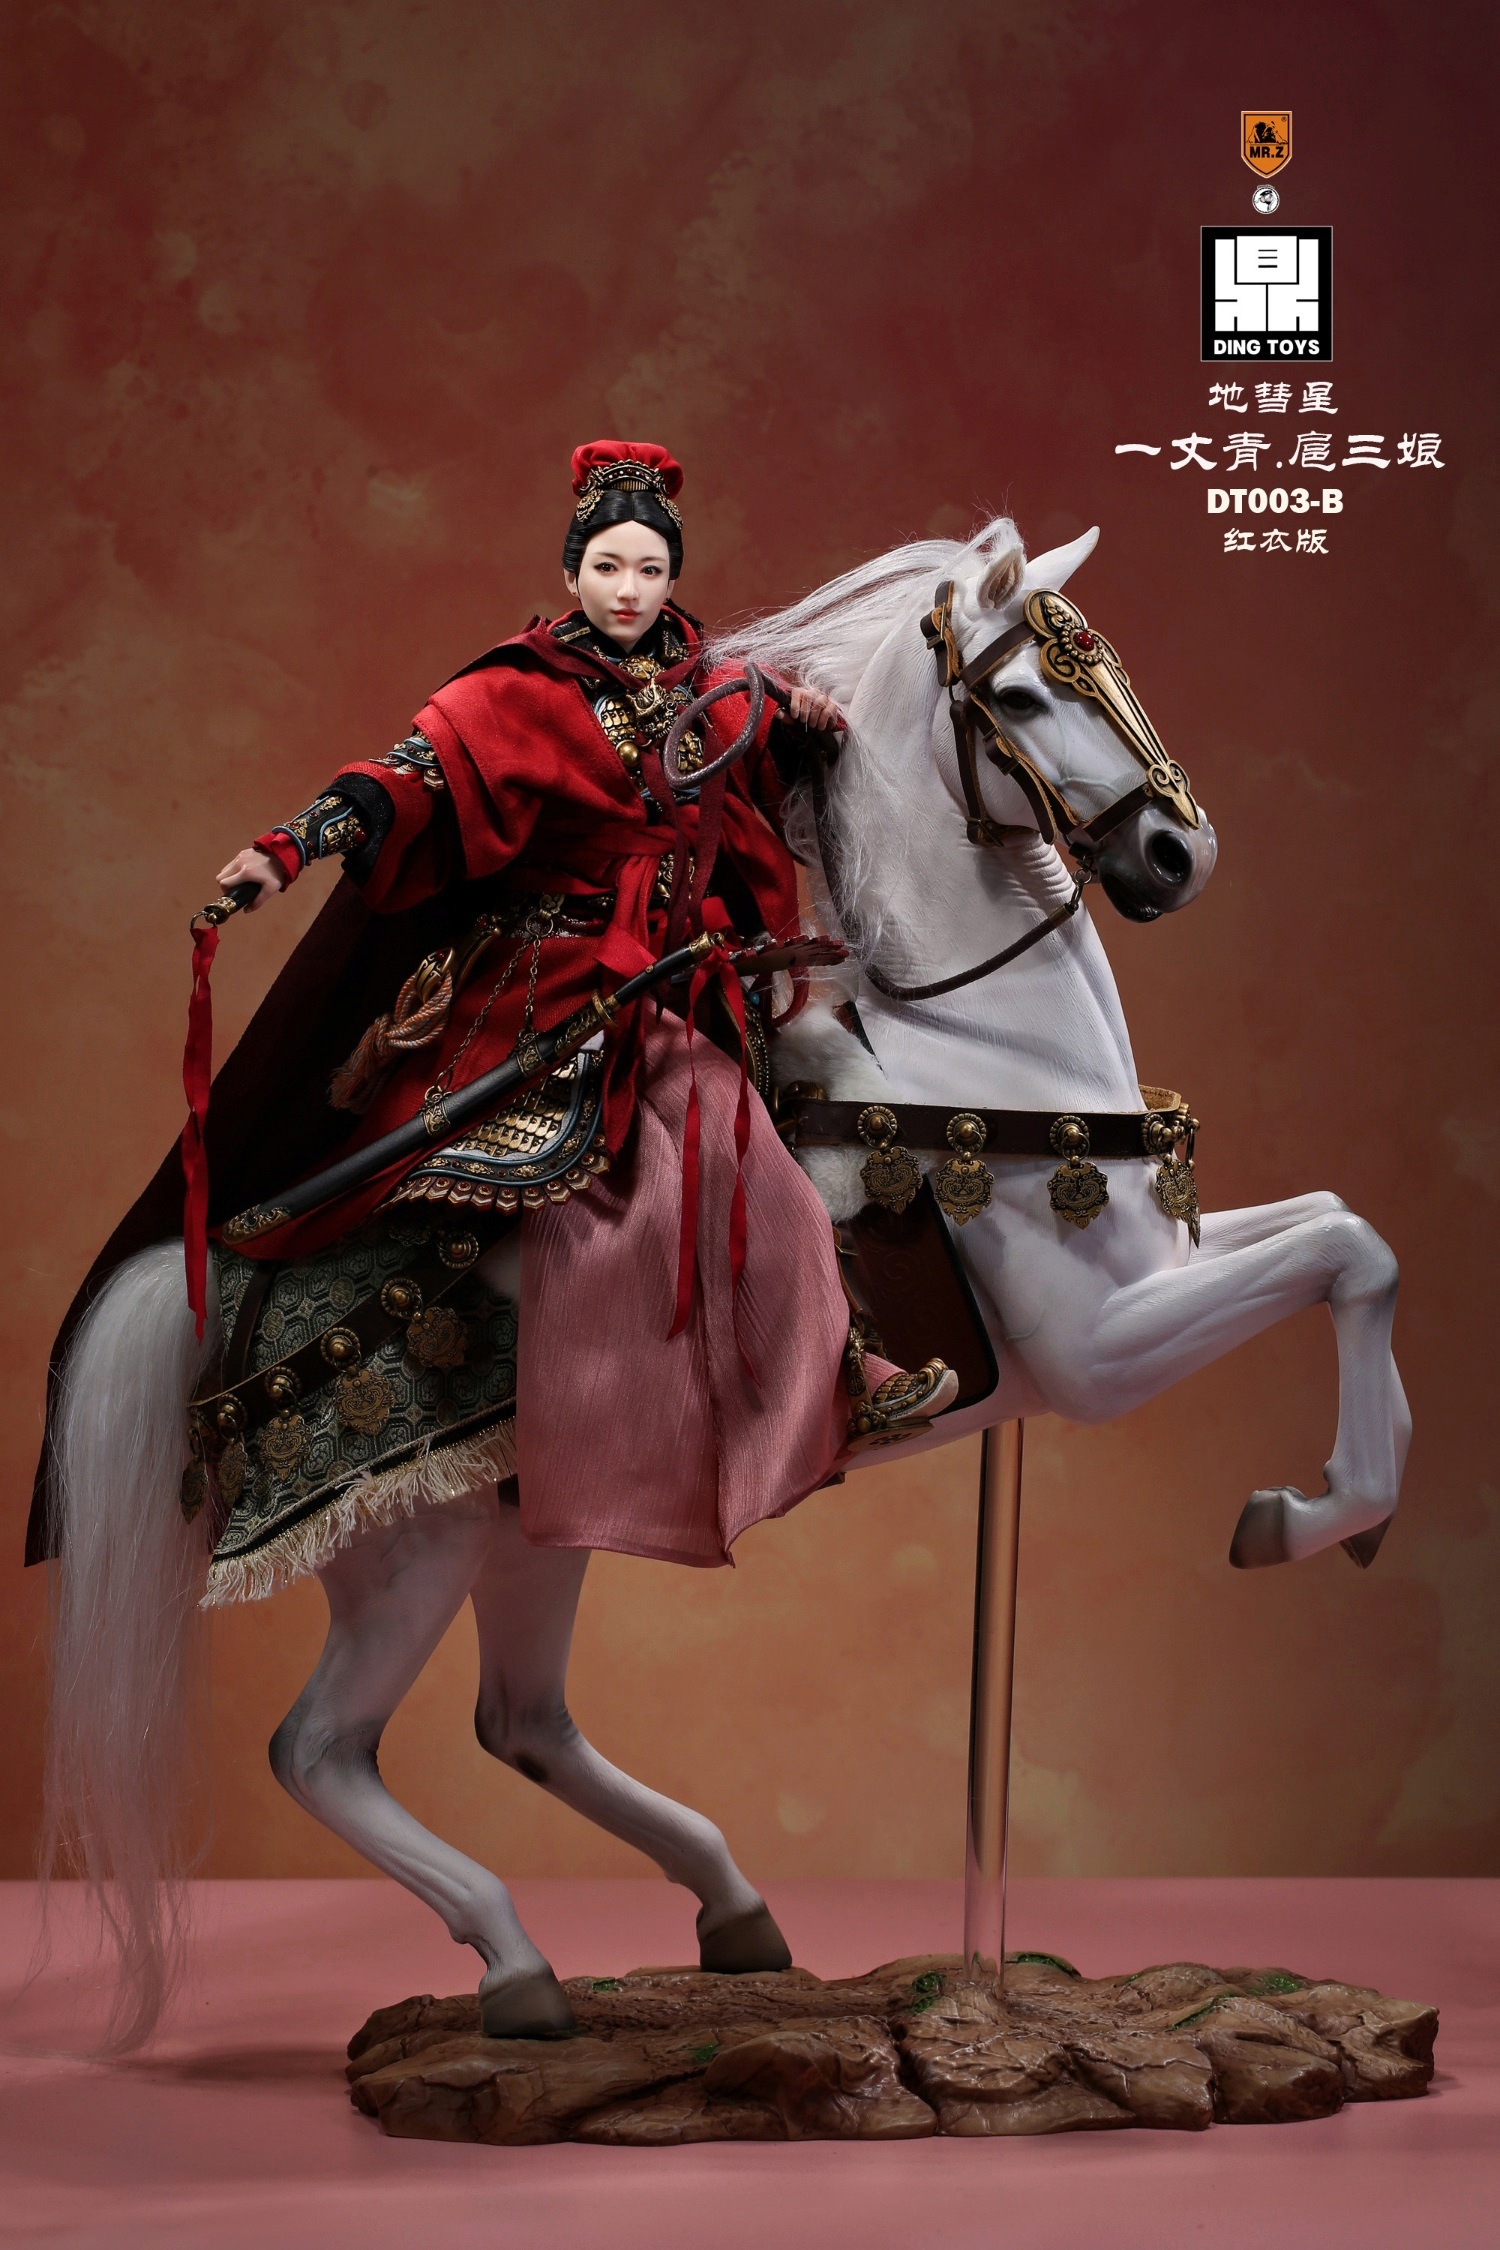 NEW PRODUCT: Mr.Z x Ding Toys DT003 1/6 Scale 《Water Margin》Shiying Zhang (Green and Red versions), Horse (White) 3626